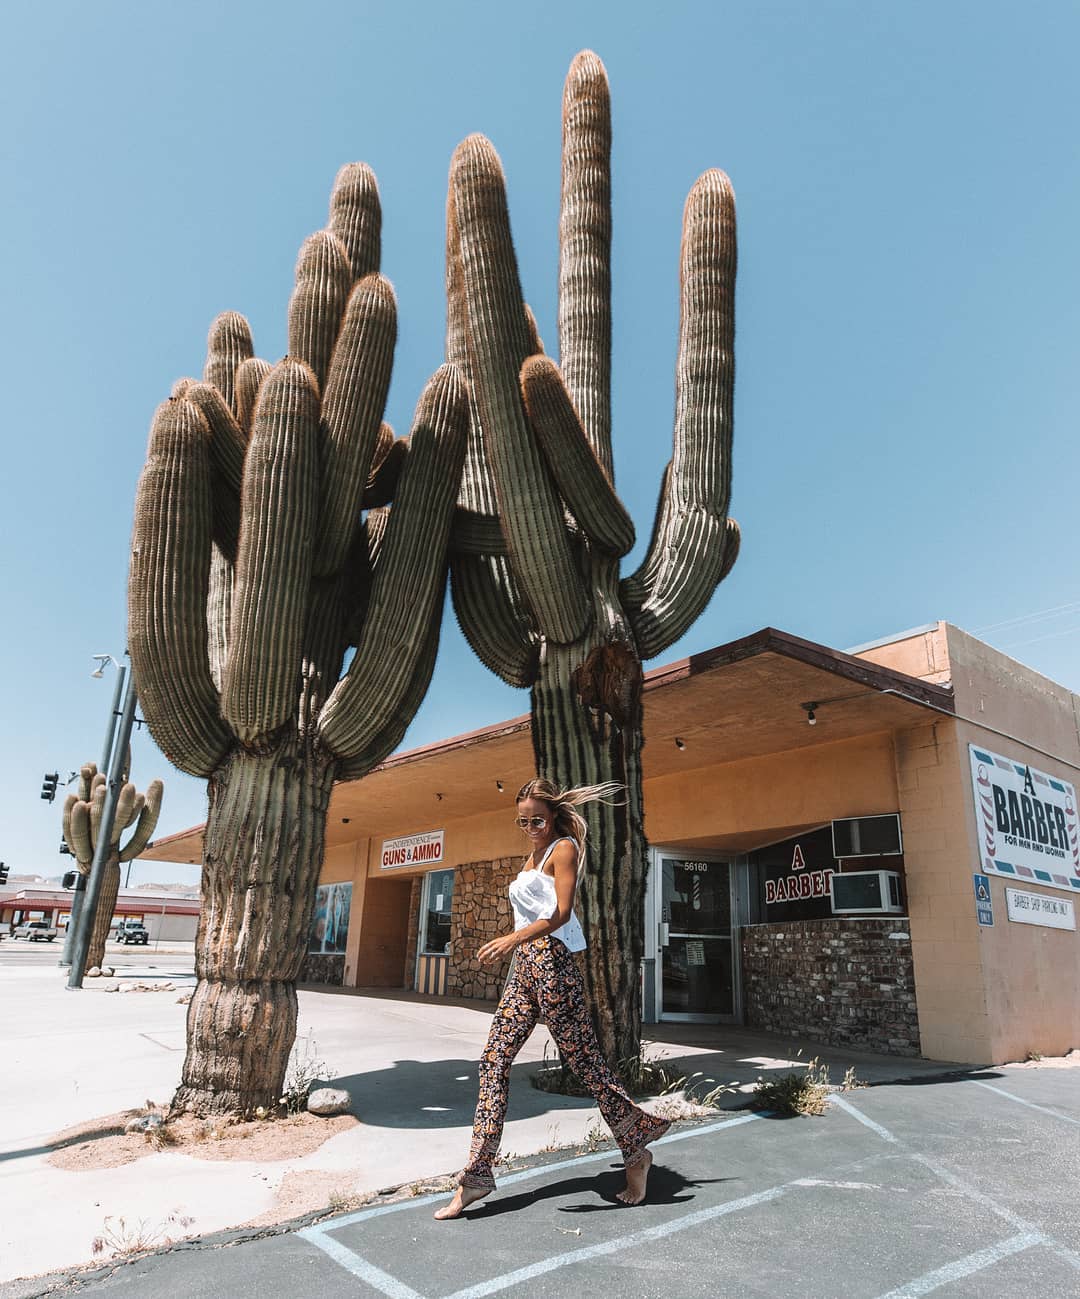 Sarah walking in front of a barber in Yucca Valley